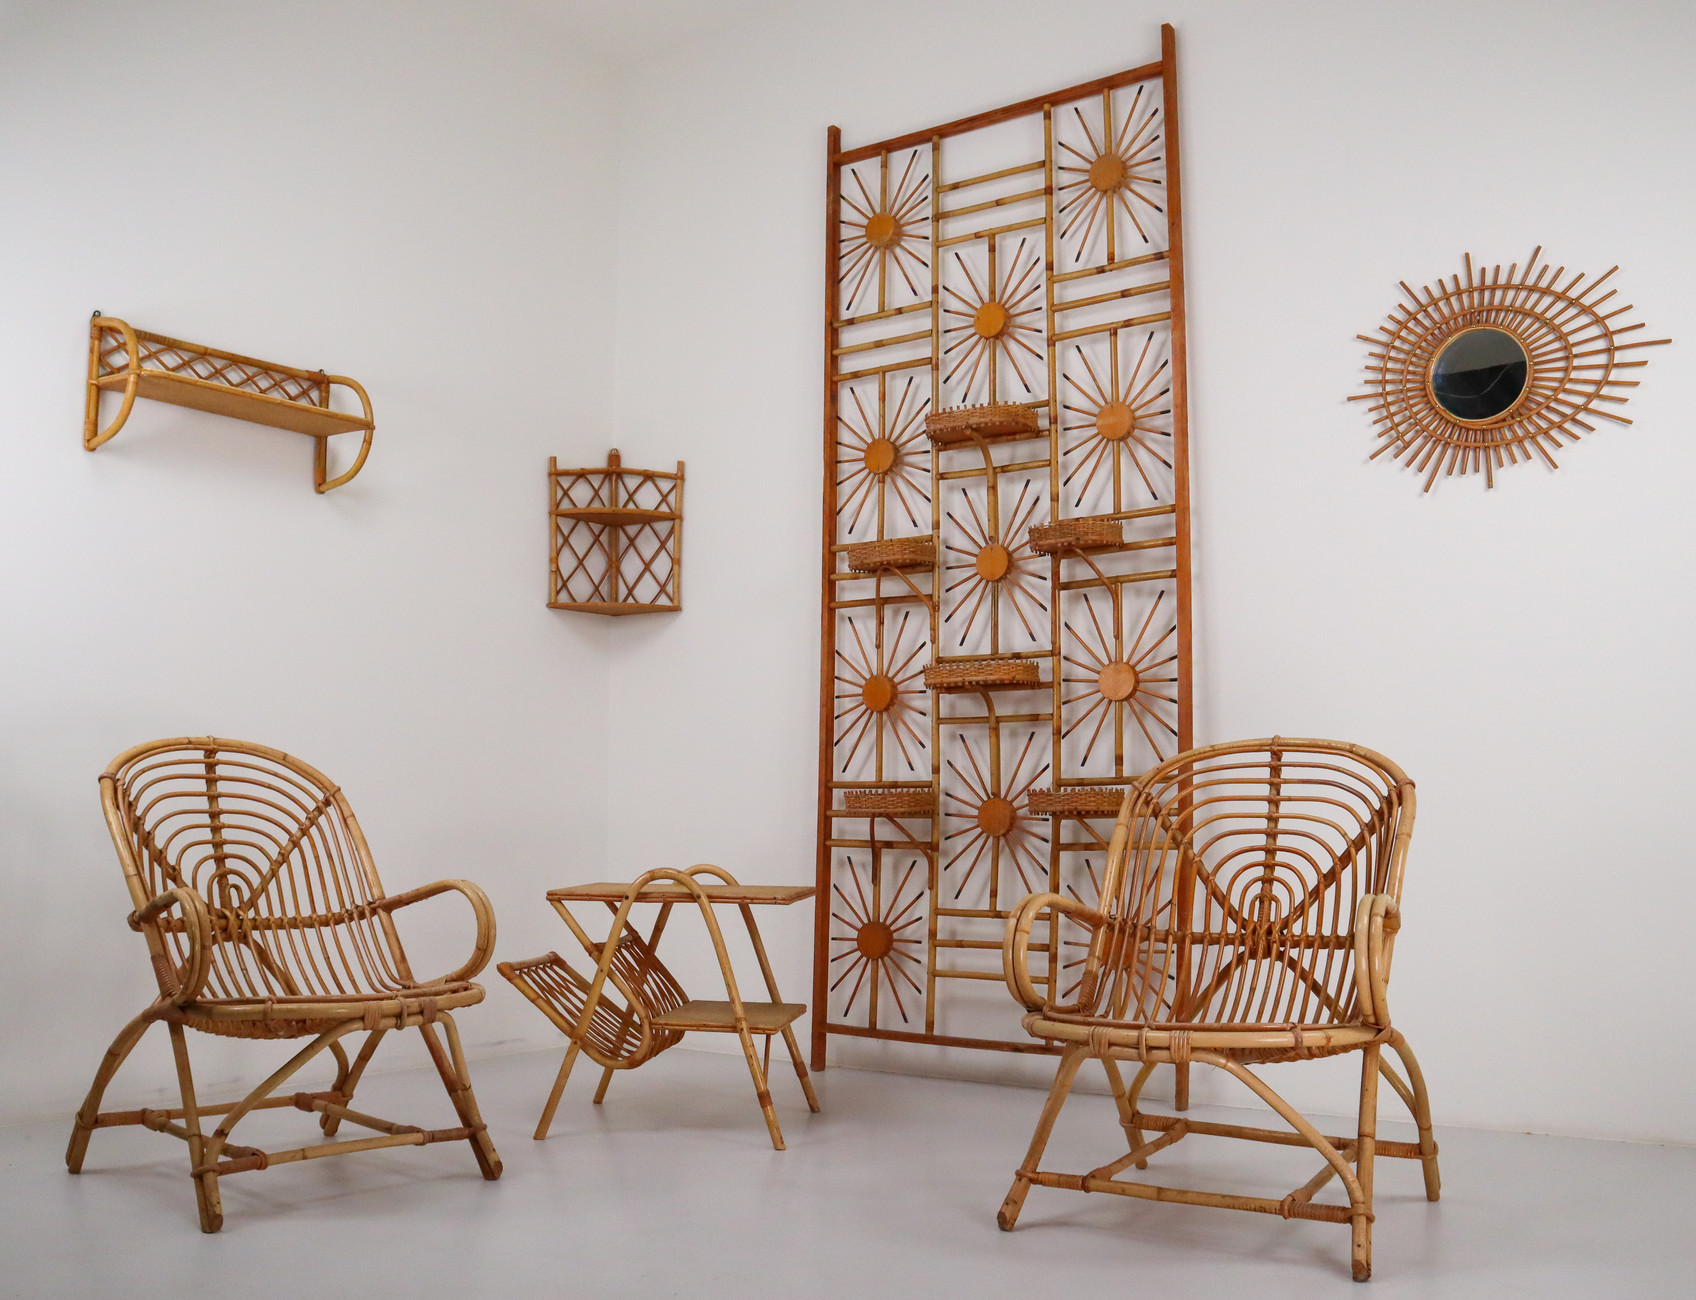 Rattan And Bamboo set of 7 items , France 1960s Mid-20th century